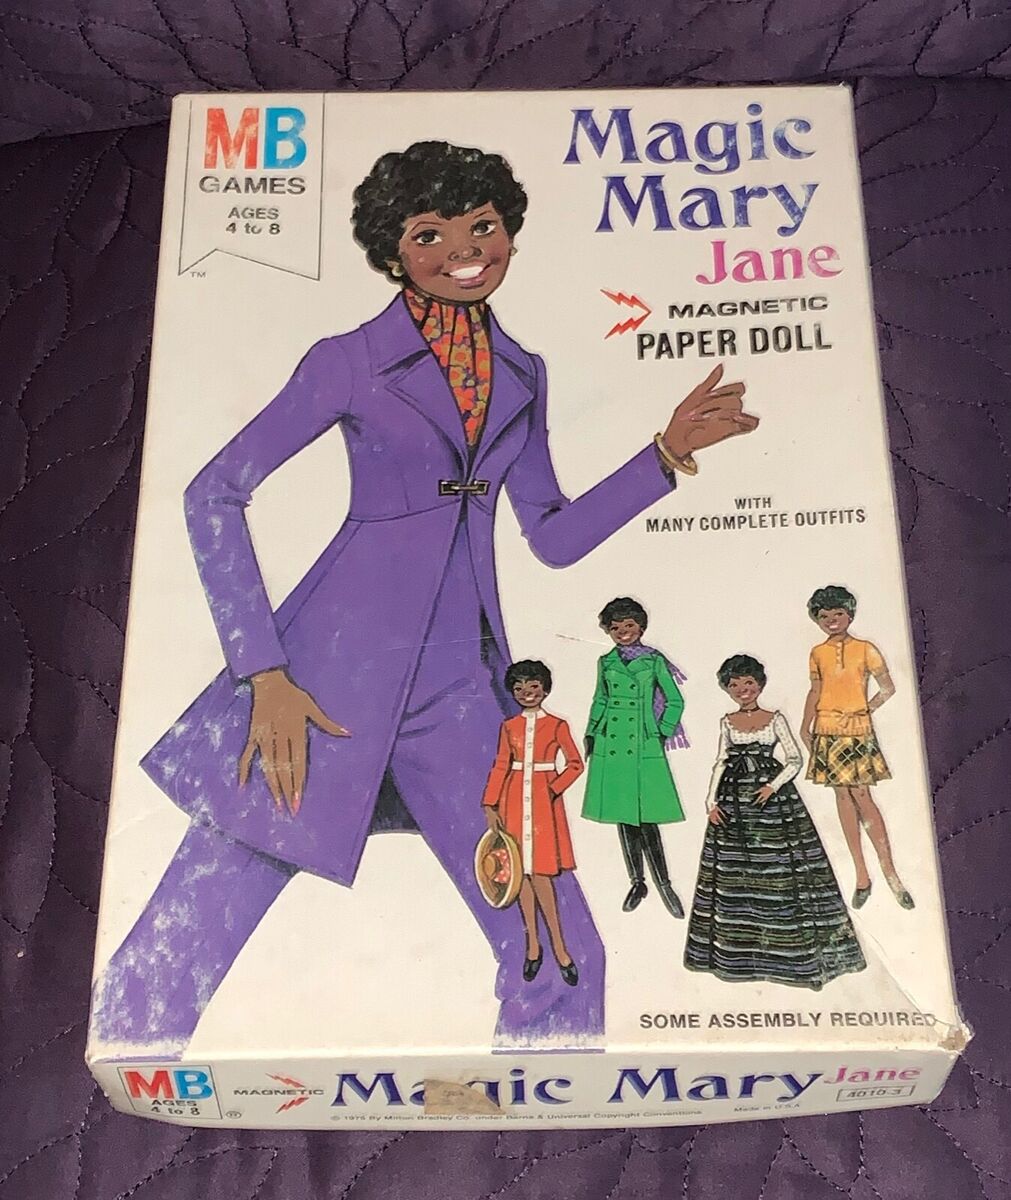 MAGIC MARY JANE MAGNETIC PAPER DOLLS BLACK AA 1975 15 OUTFITS AND